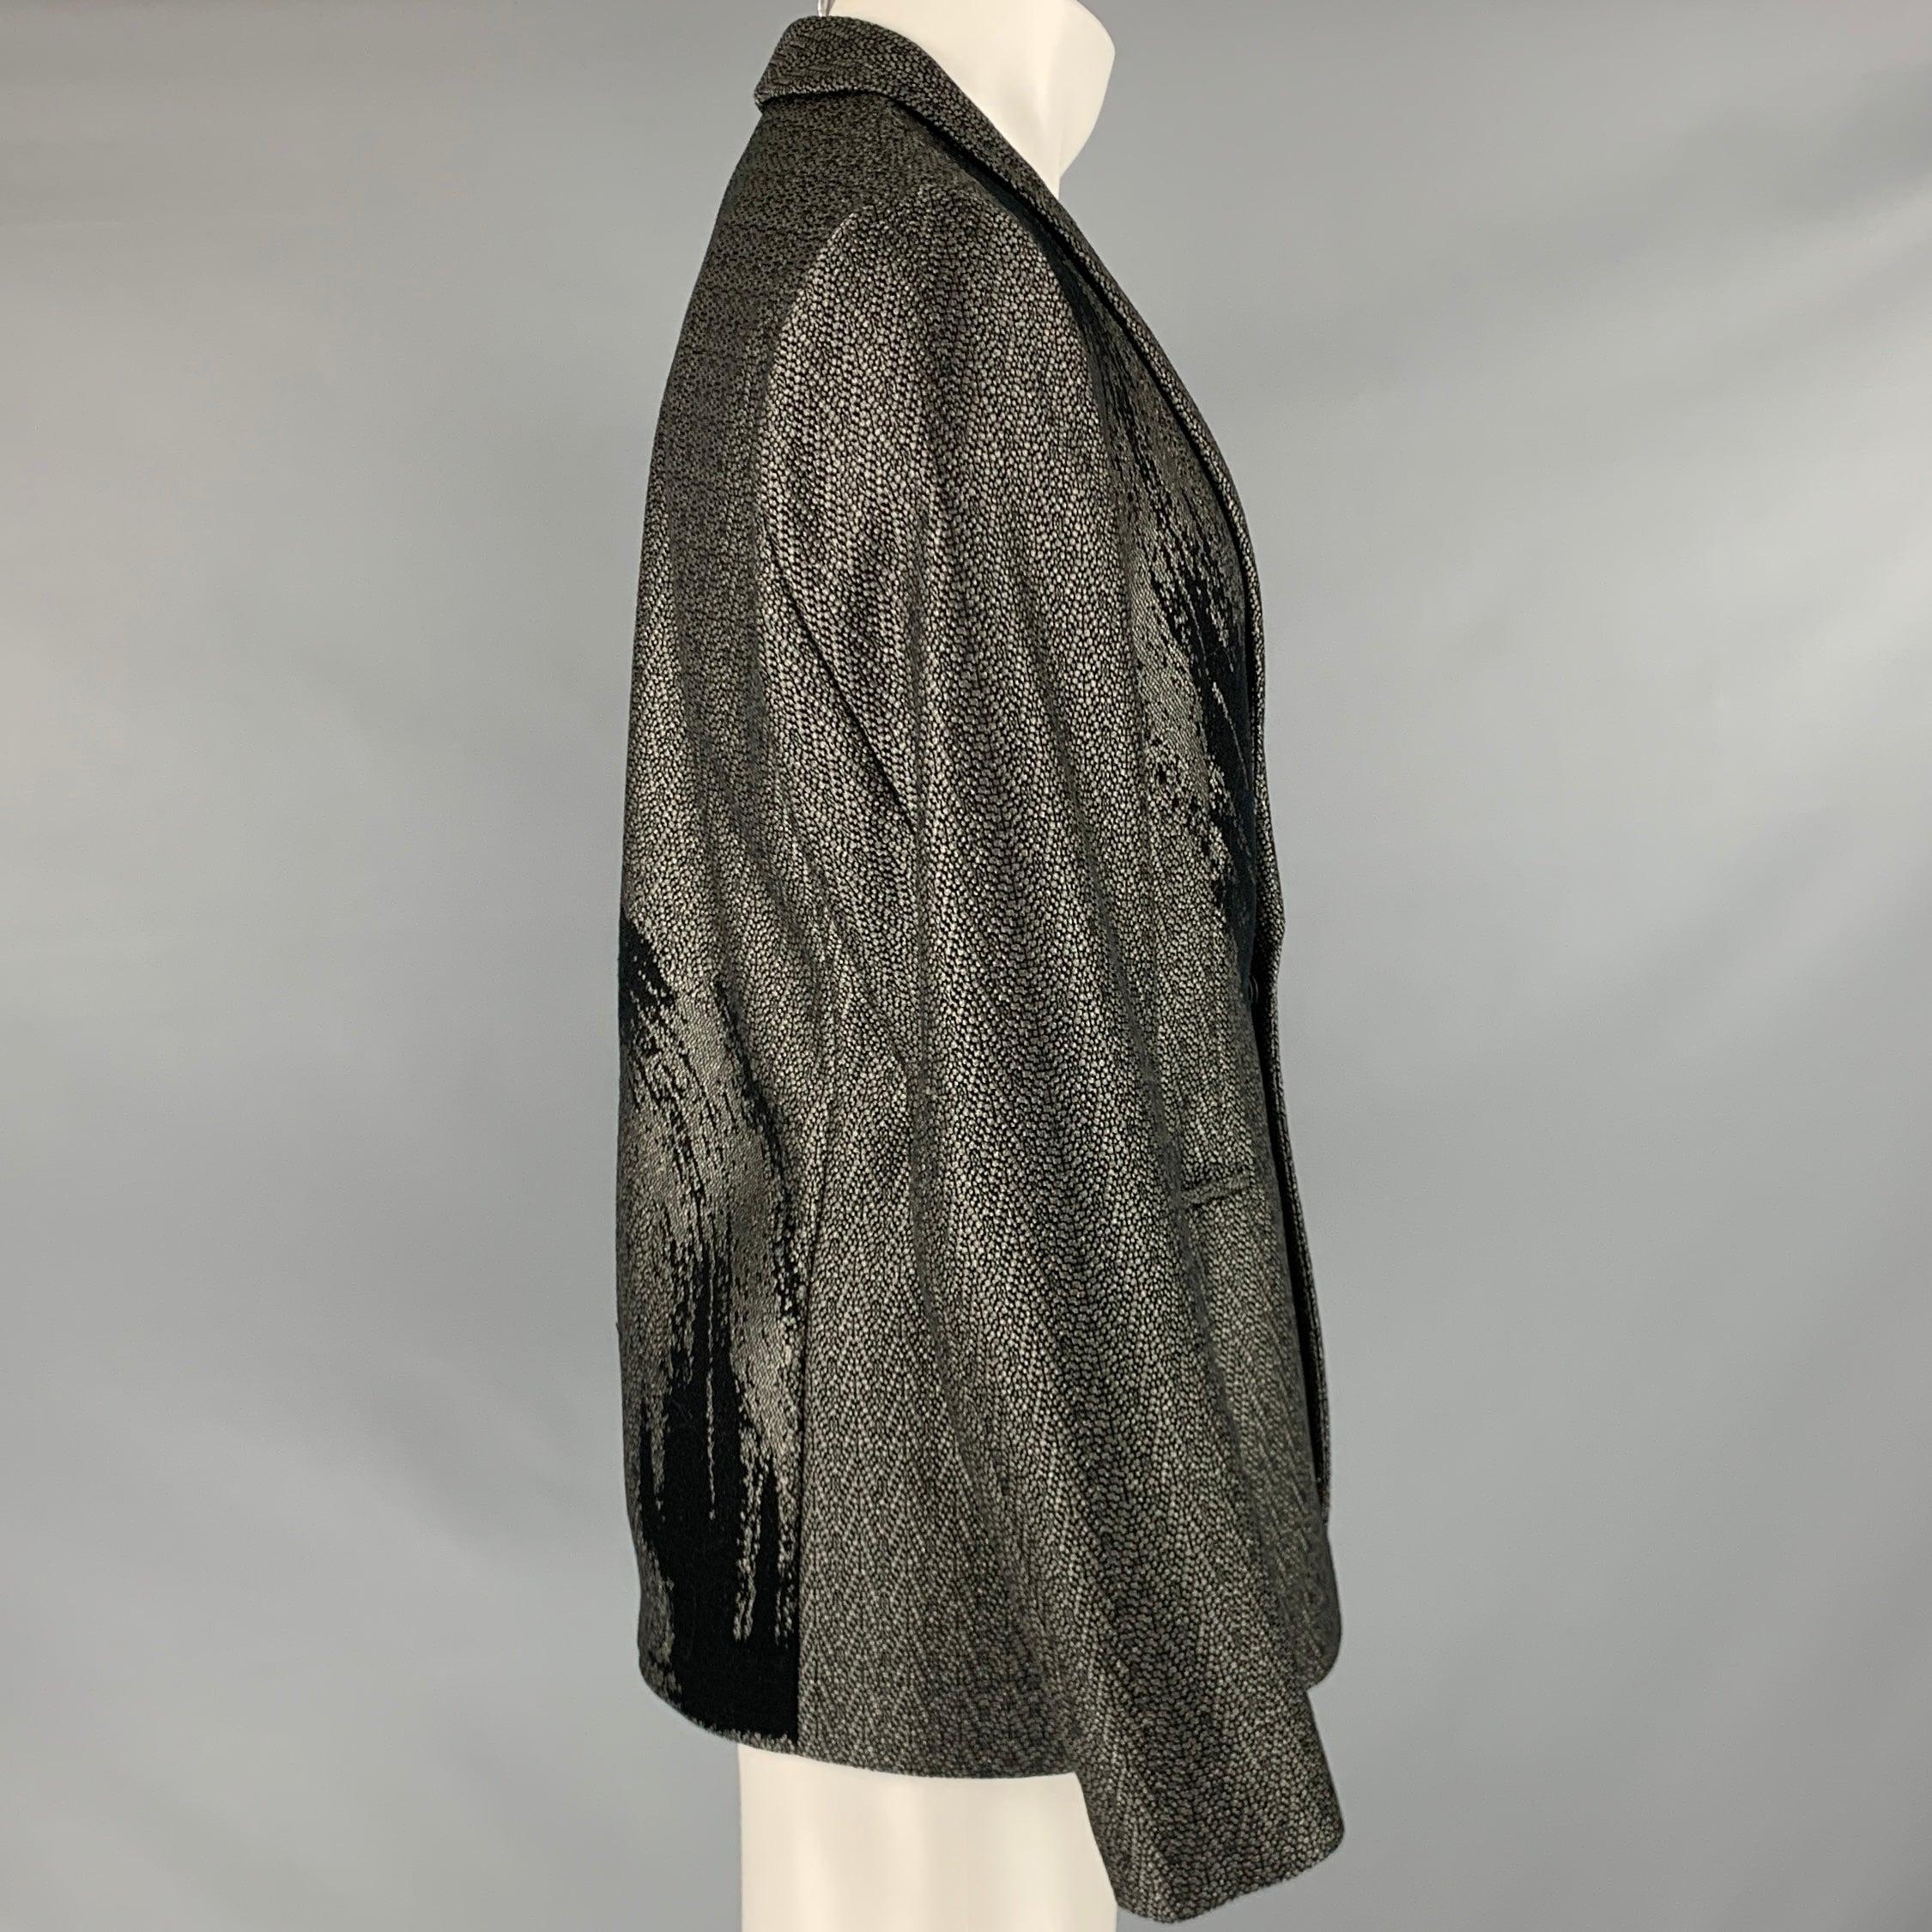 EMPORIO ARMANI sport coat
in a black woven fabric featuring brushstroke jacquard design, shawl collar, and single snap closure. Made in Italy.Very Good Pre-Owned Condition. Minor signs of wear. 

Marked:   size not marked 

Measurements: 
